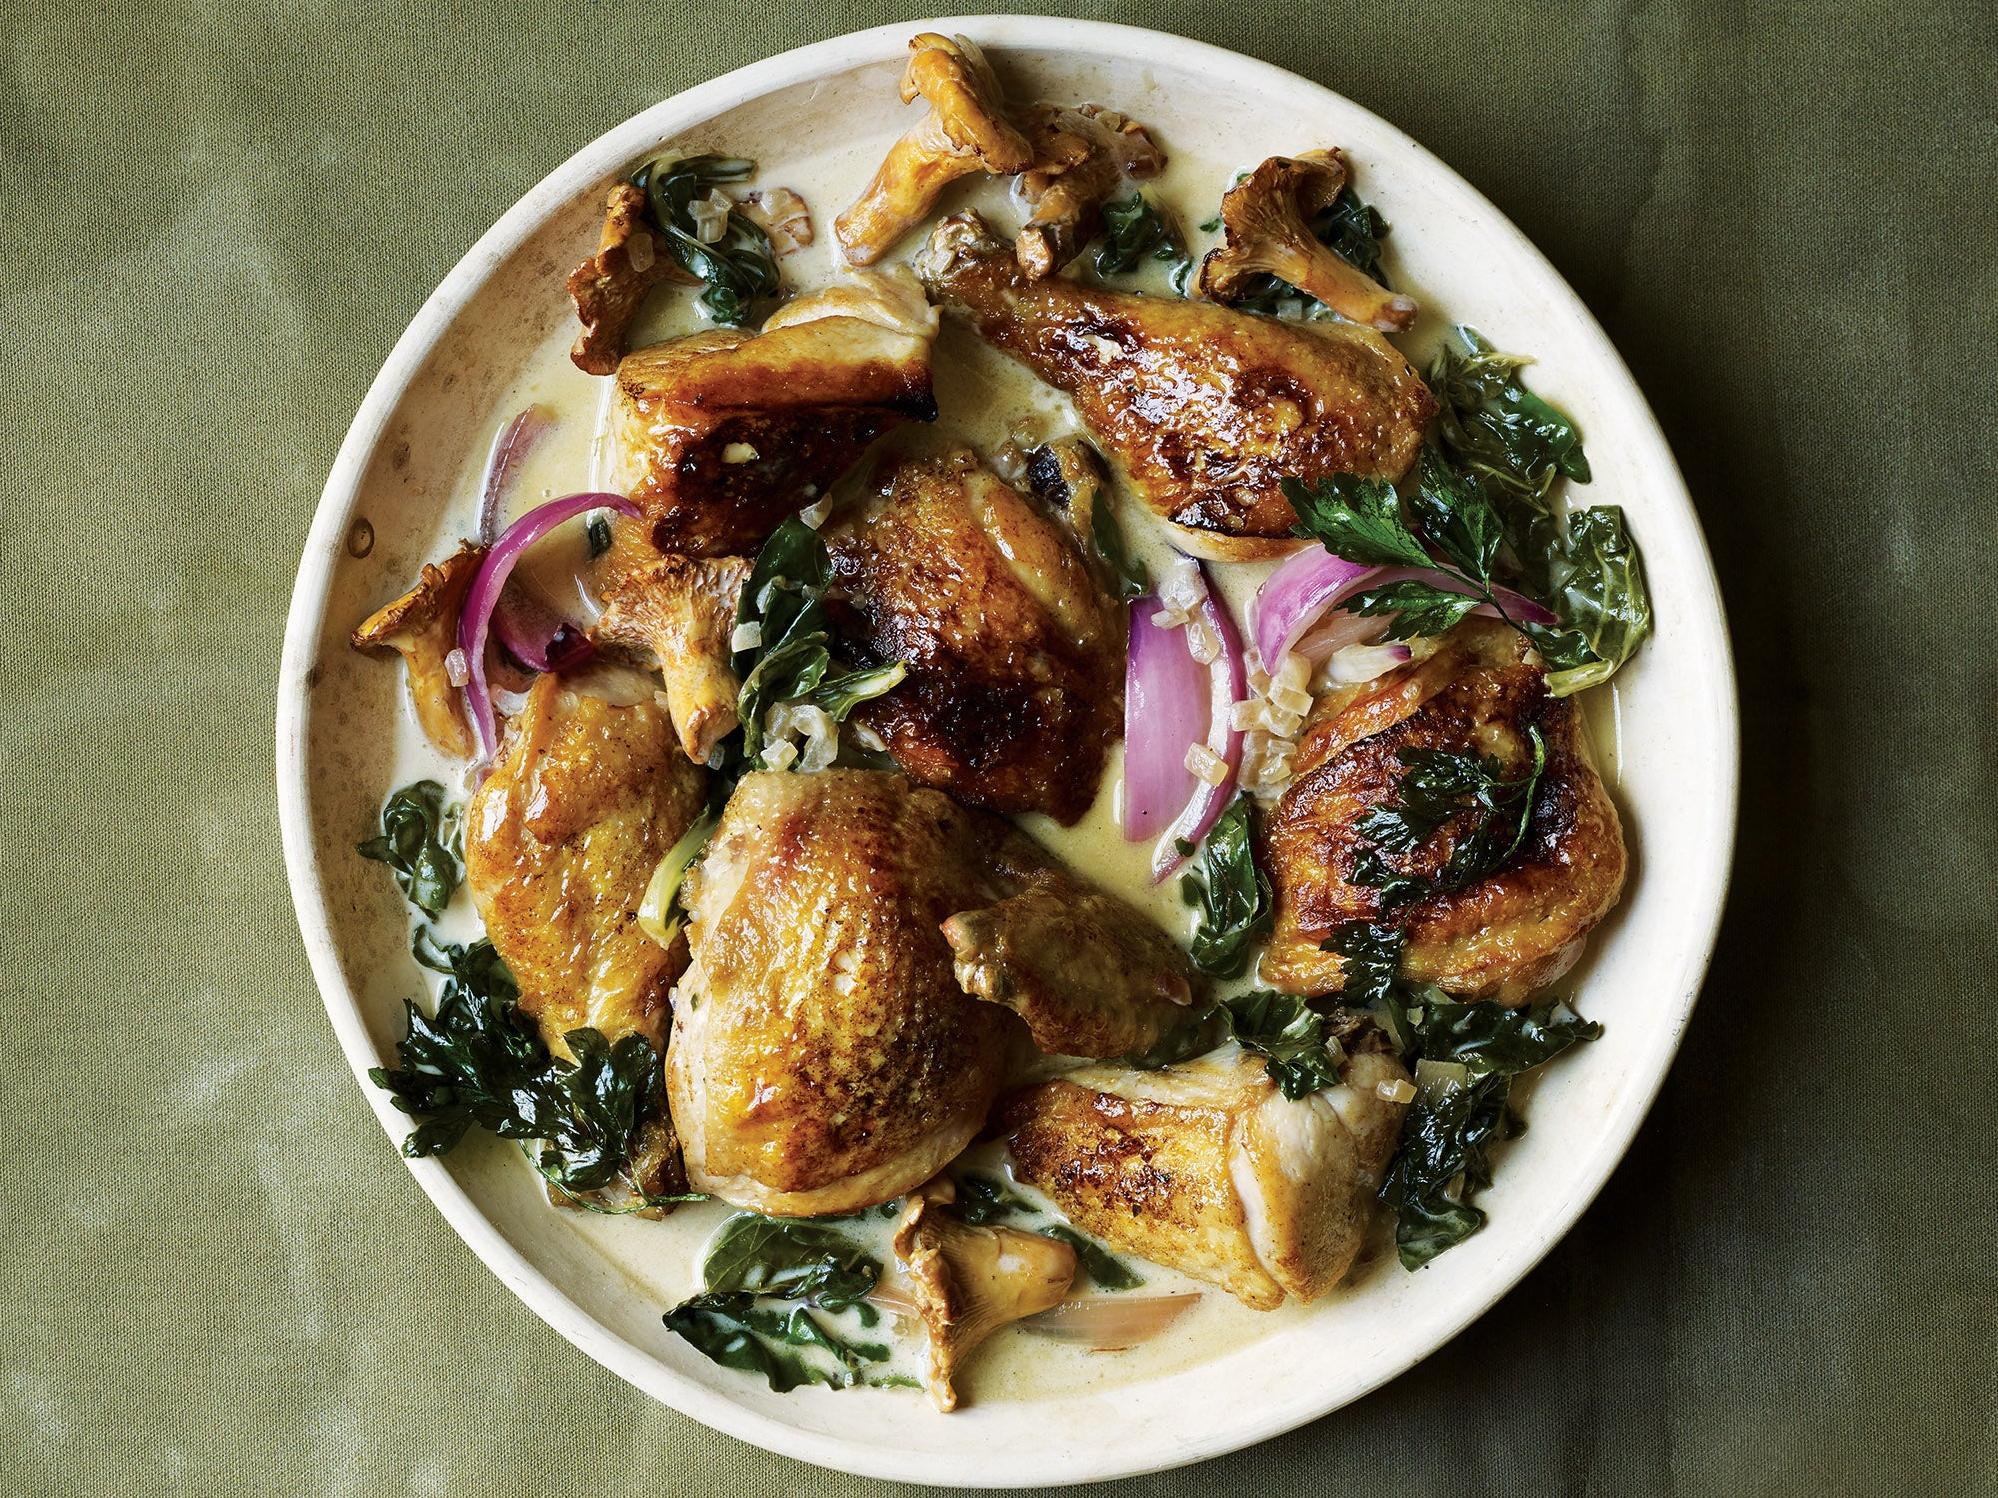  This dish is perfect for a fancy dinner party or a cozy night in with a glass of wine